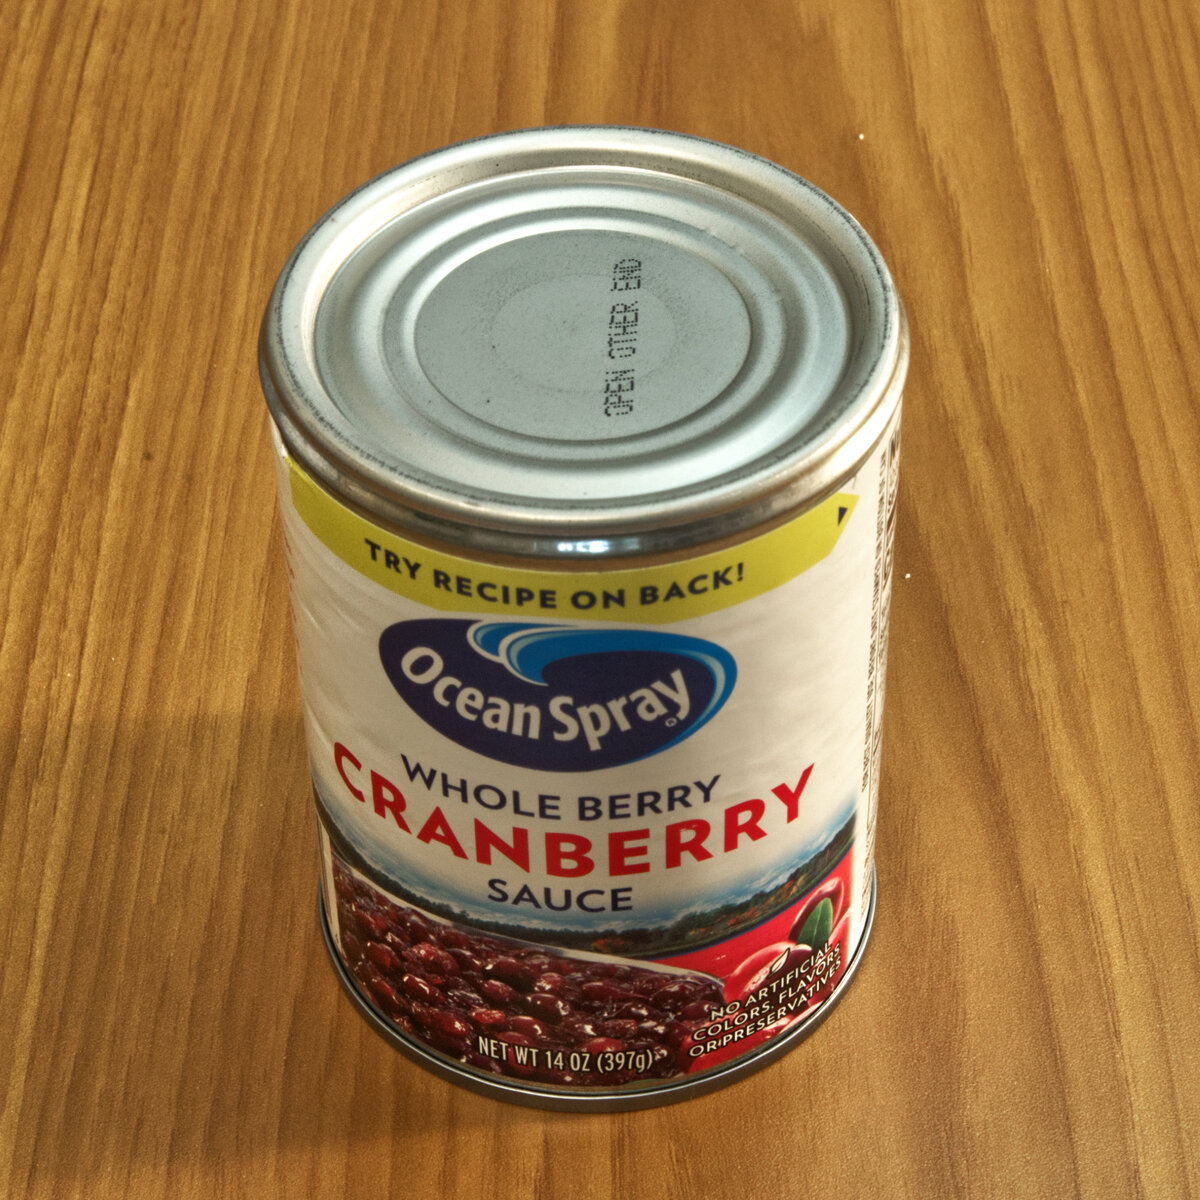 Canned Whole Cranberry Sauce